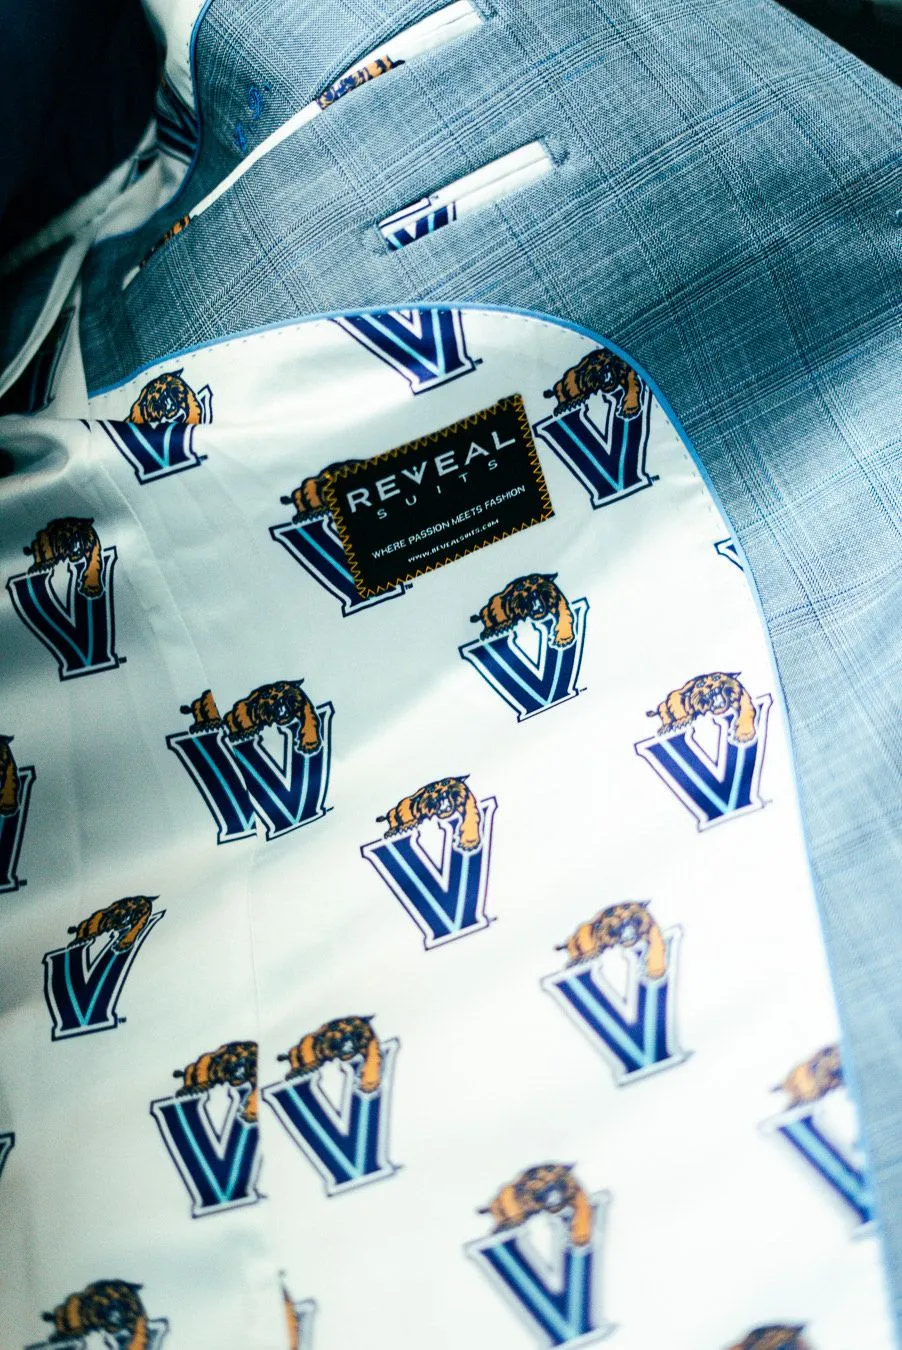 Detail of the inner side of a blazer